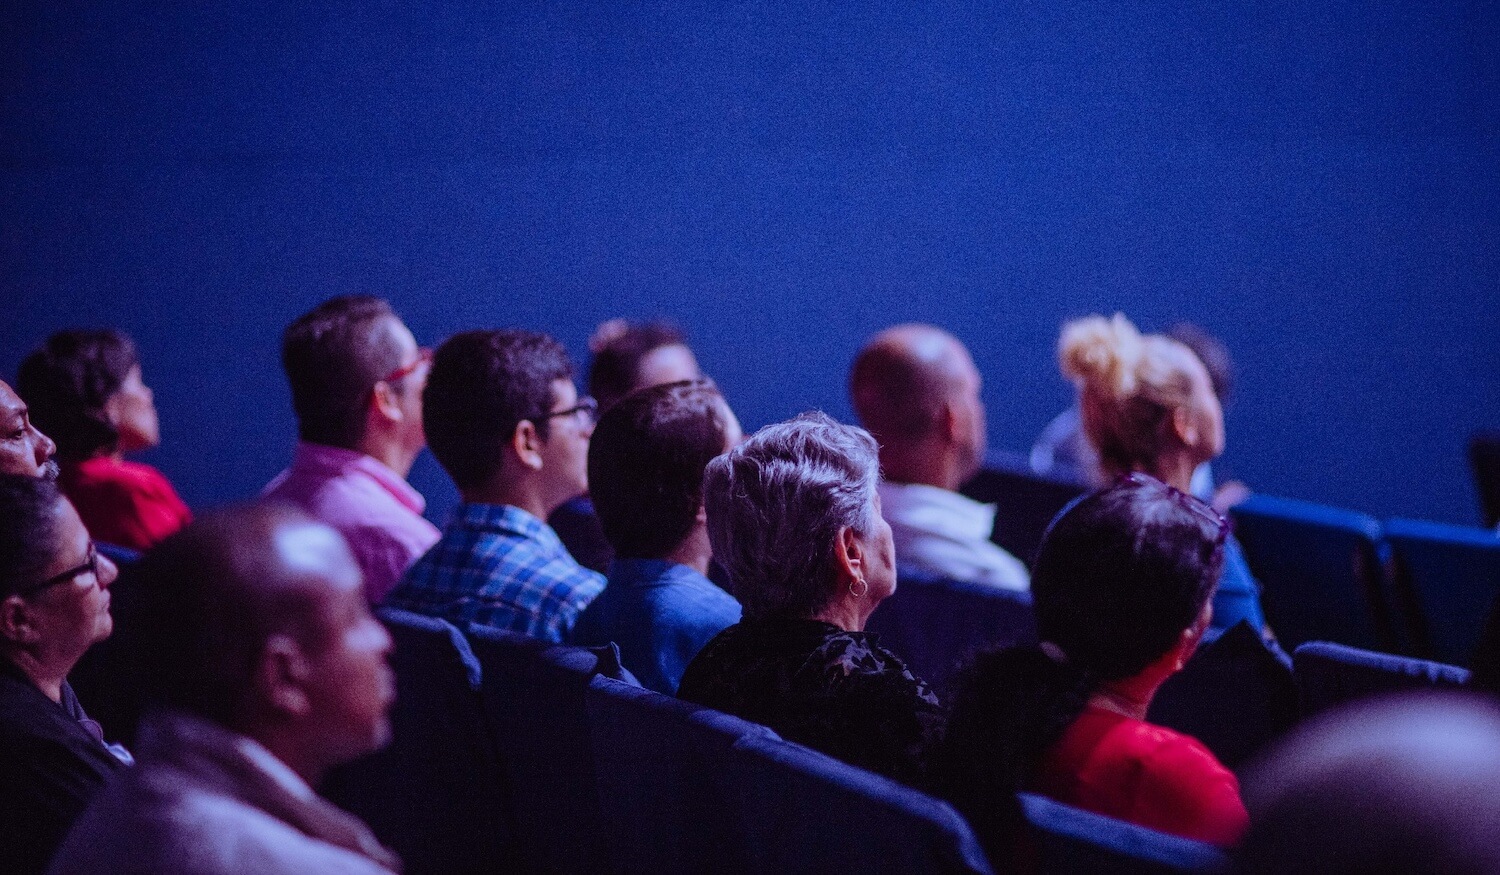 people at conference watching video in dark room